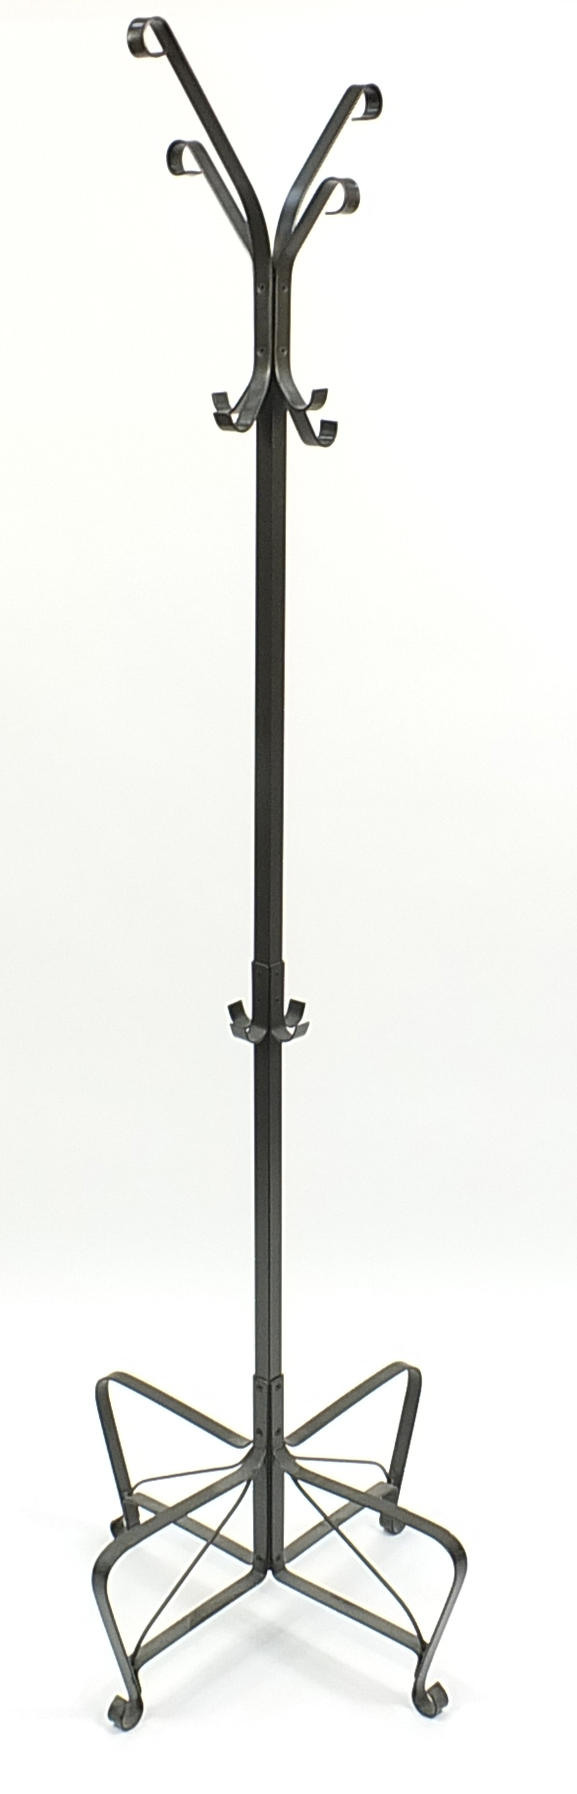 Industrial style metal coat stand, 191cm high